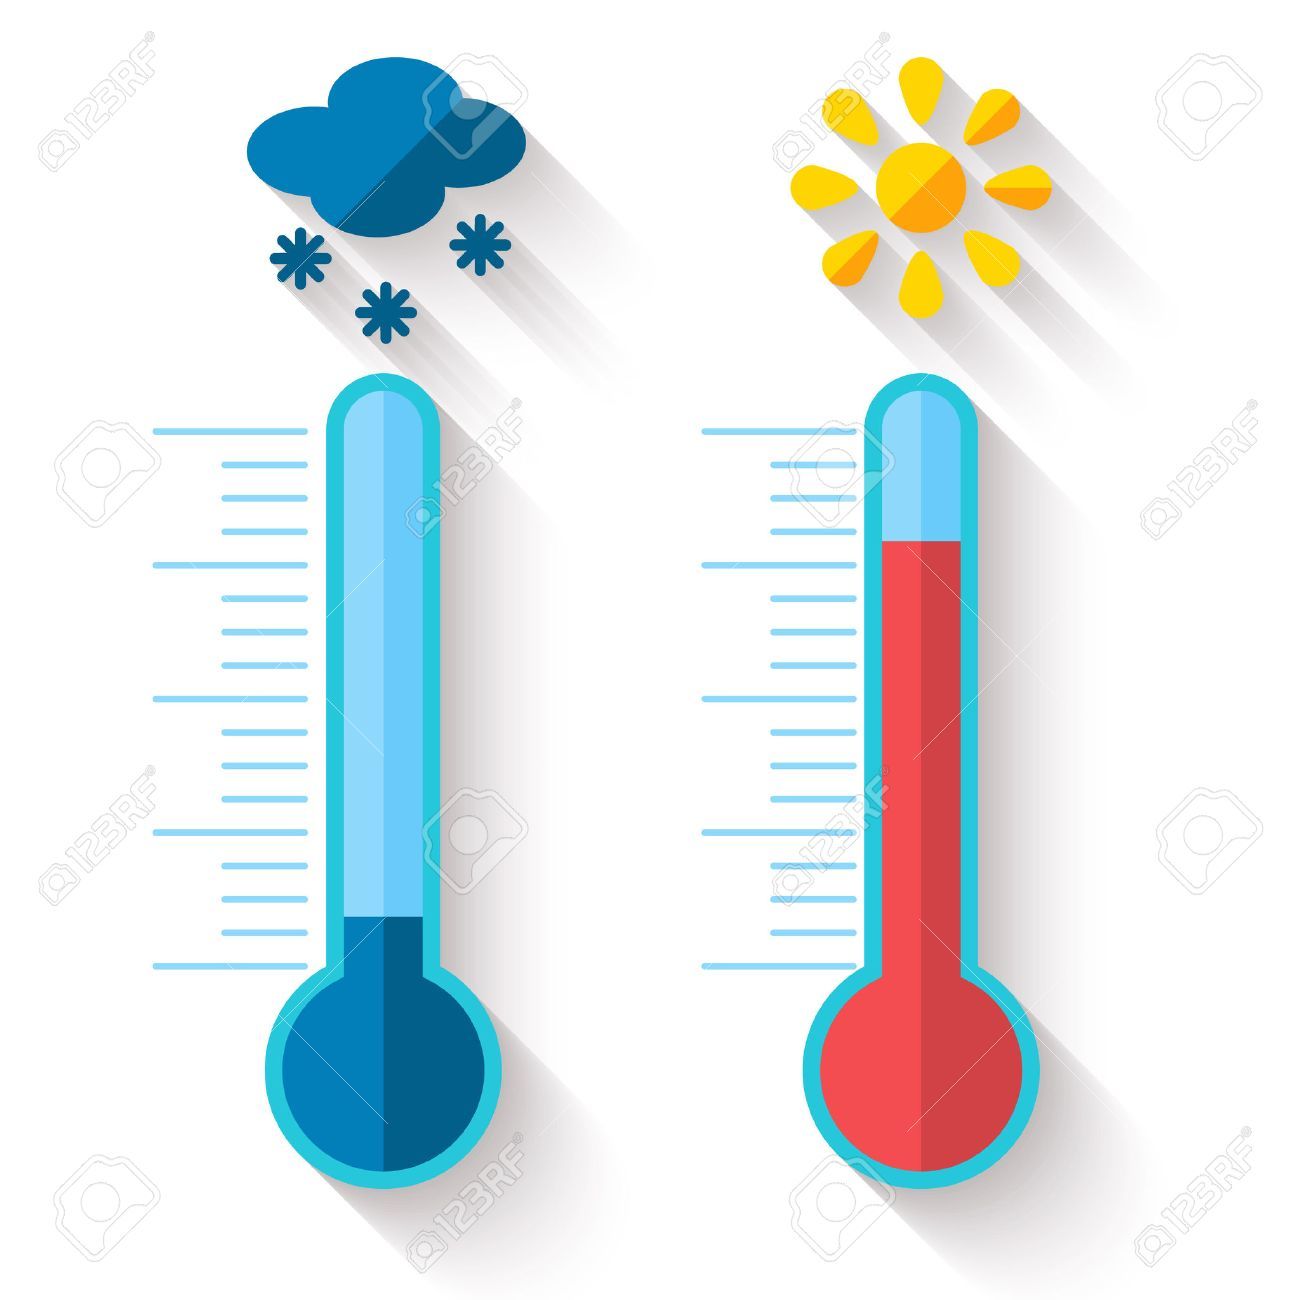 37885386-flat-design-of-thermometer-measuring-heat-and-cold-with-sun-and-snowflake-icons-vector-illu